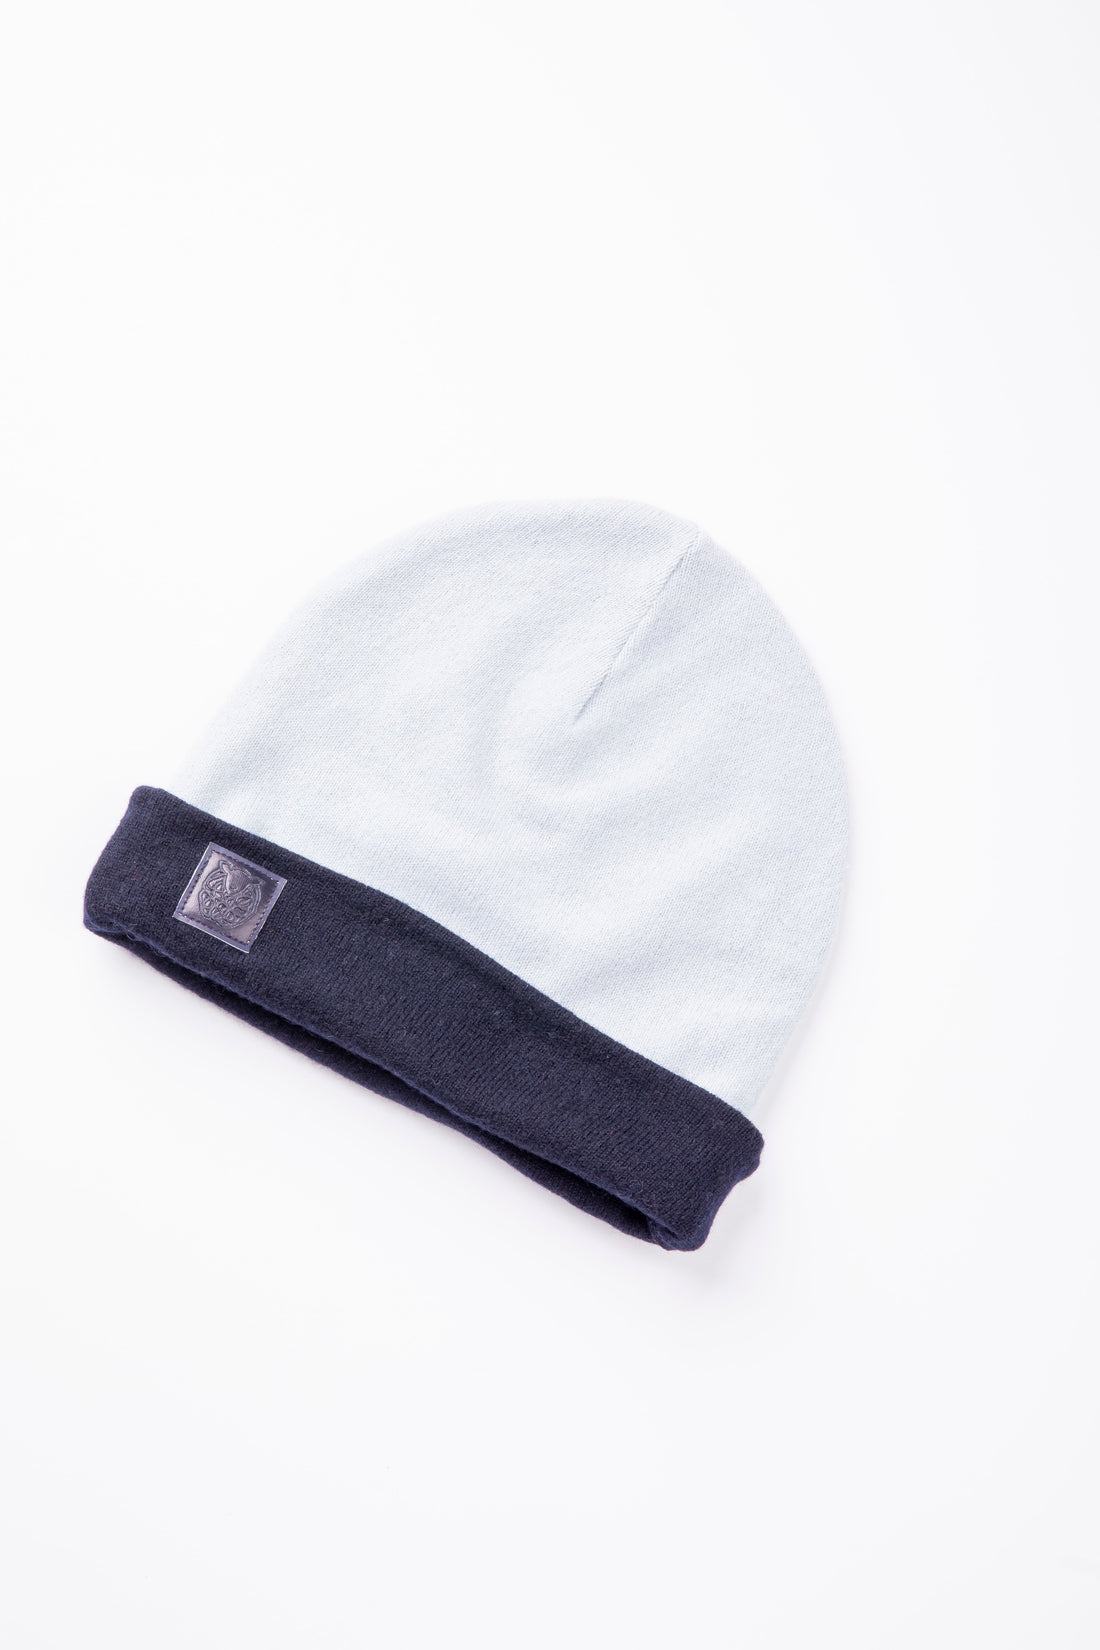 Light Blue and Navy Blue - Reversible Cashmere Beanie